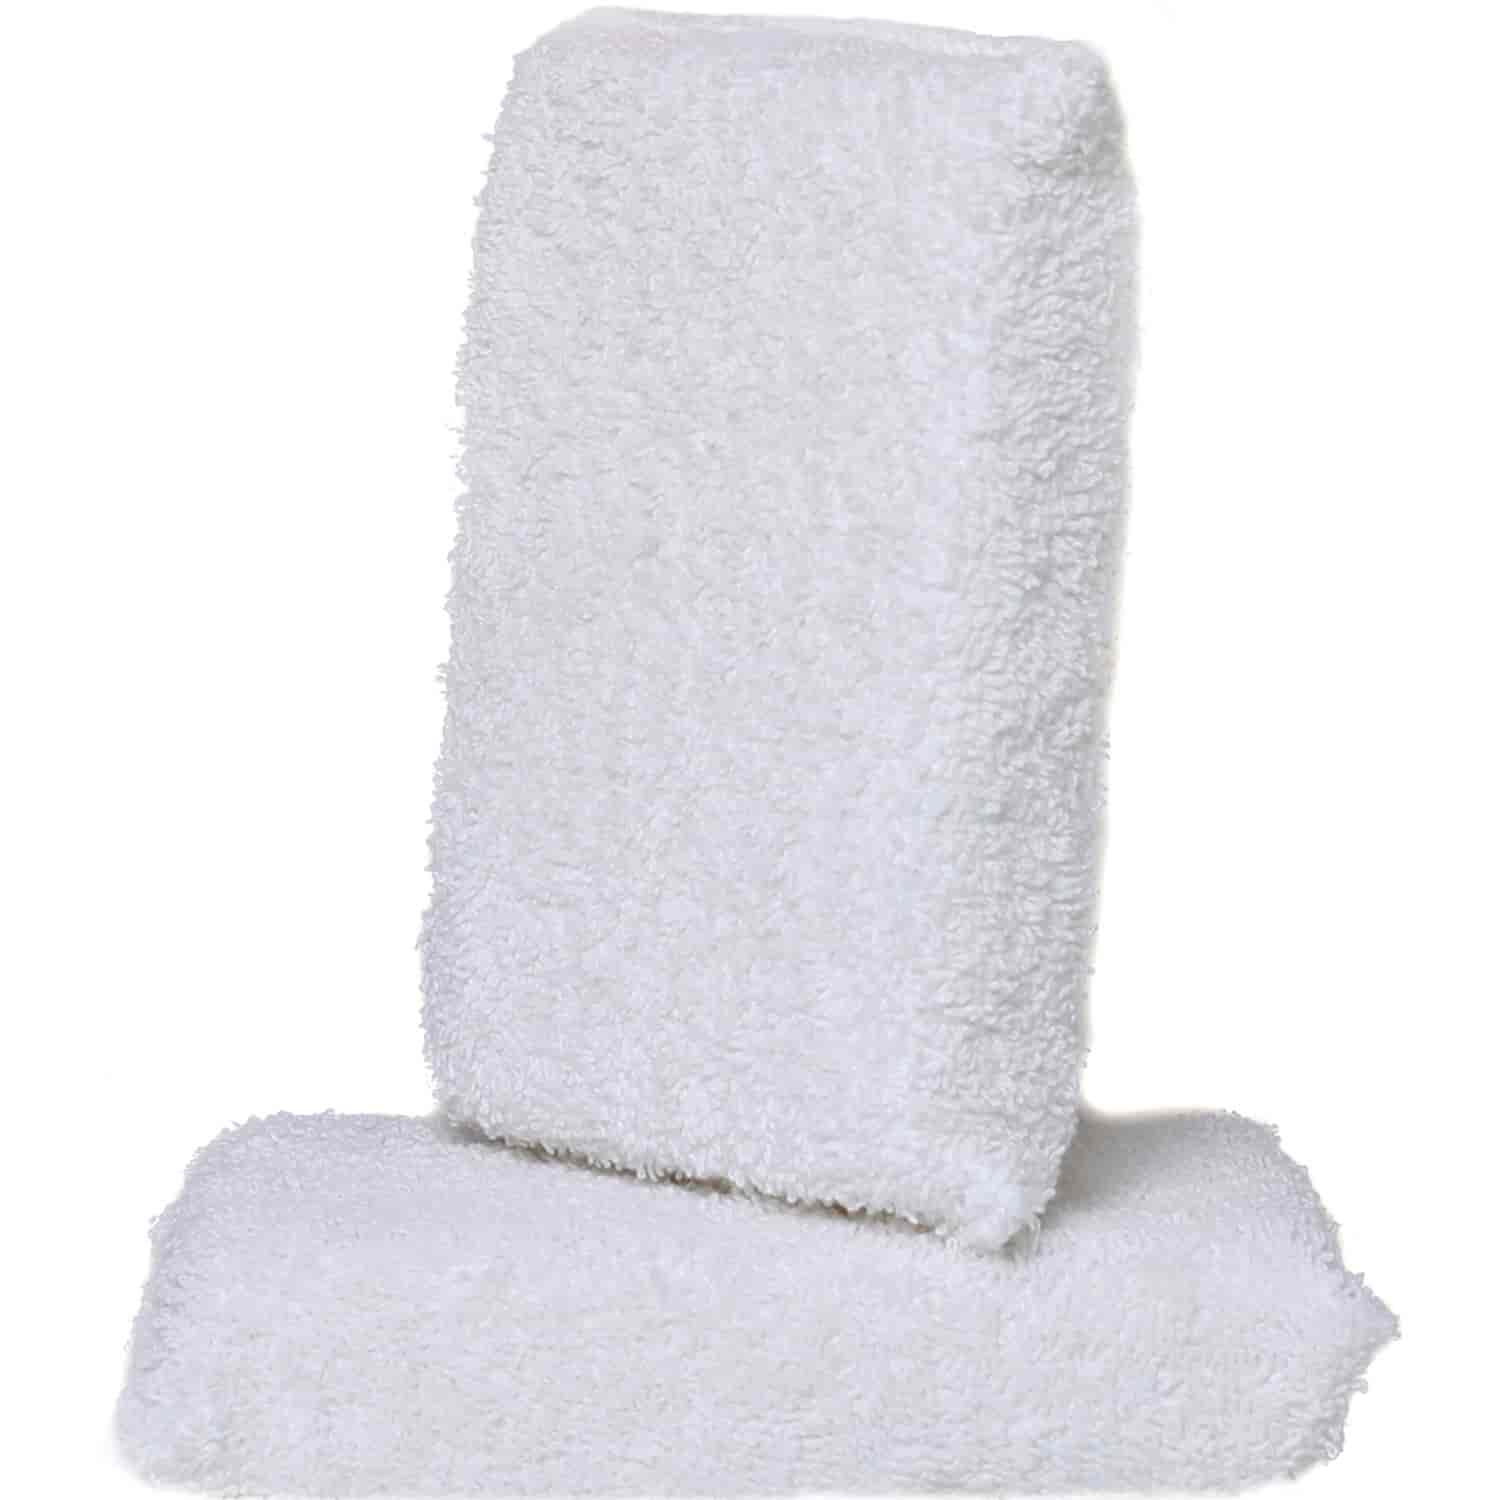 Applicator Pad Poly Sponge Wrapped In Terry Cloth